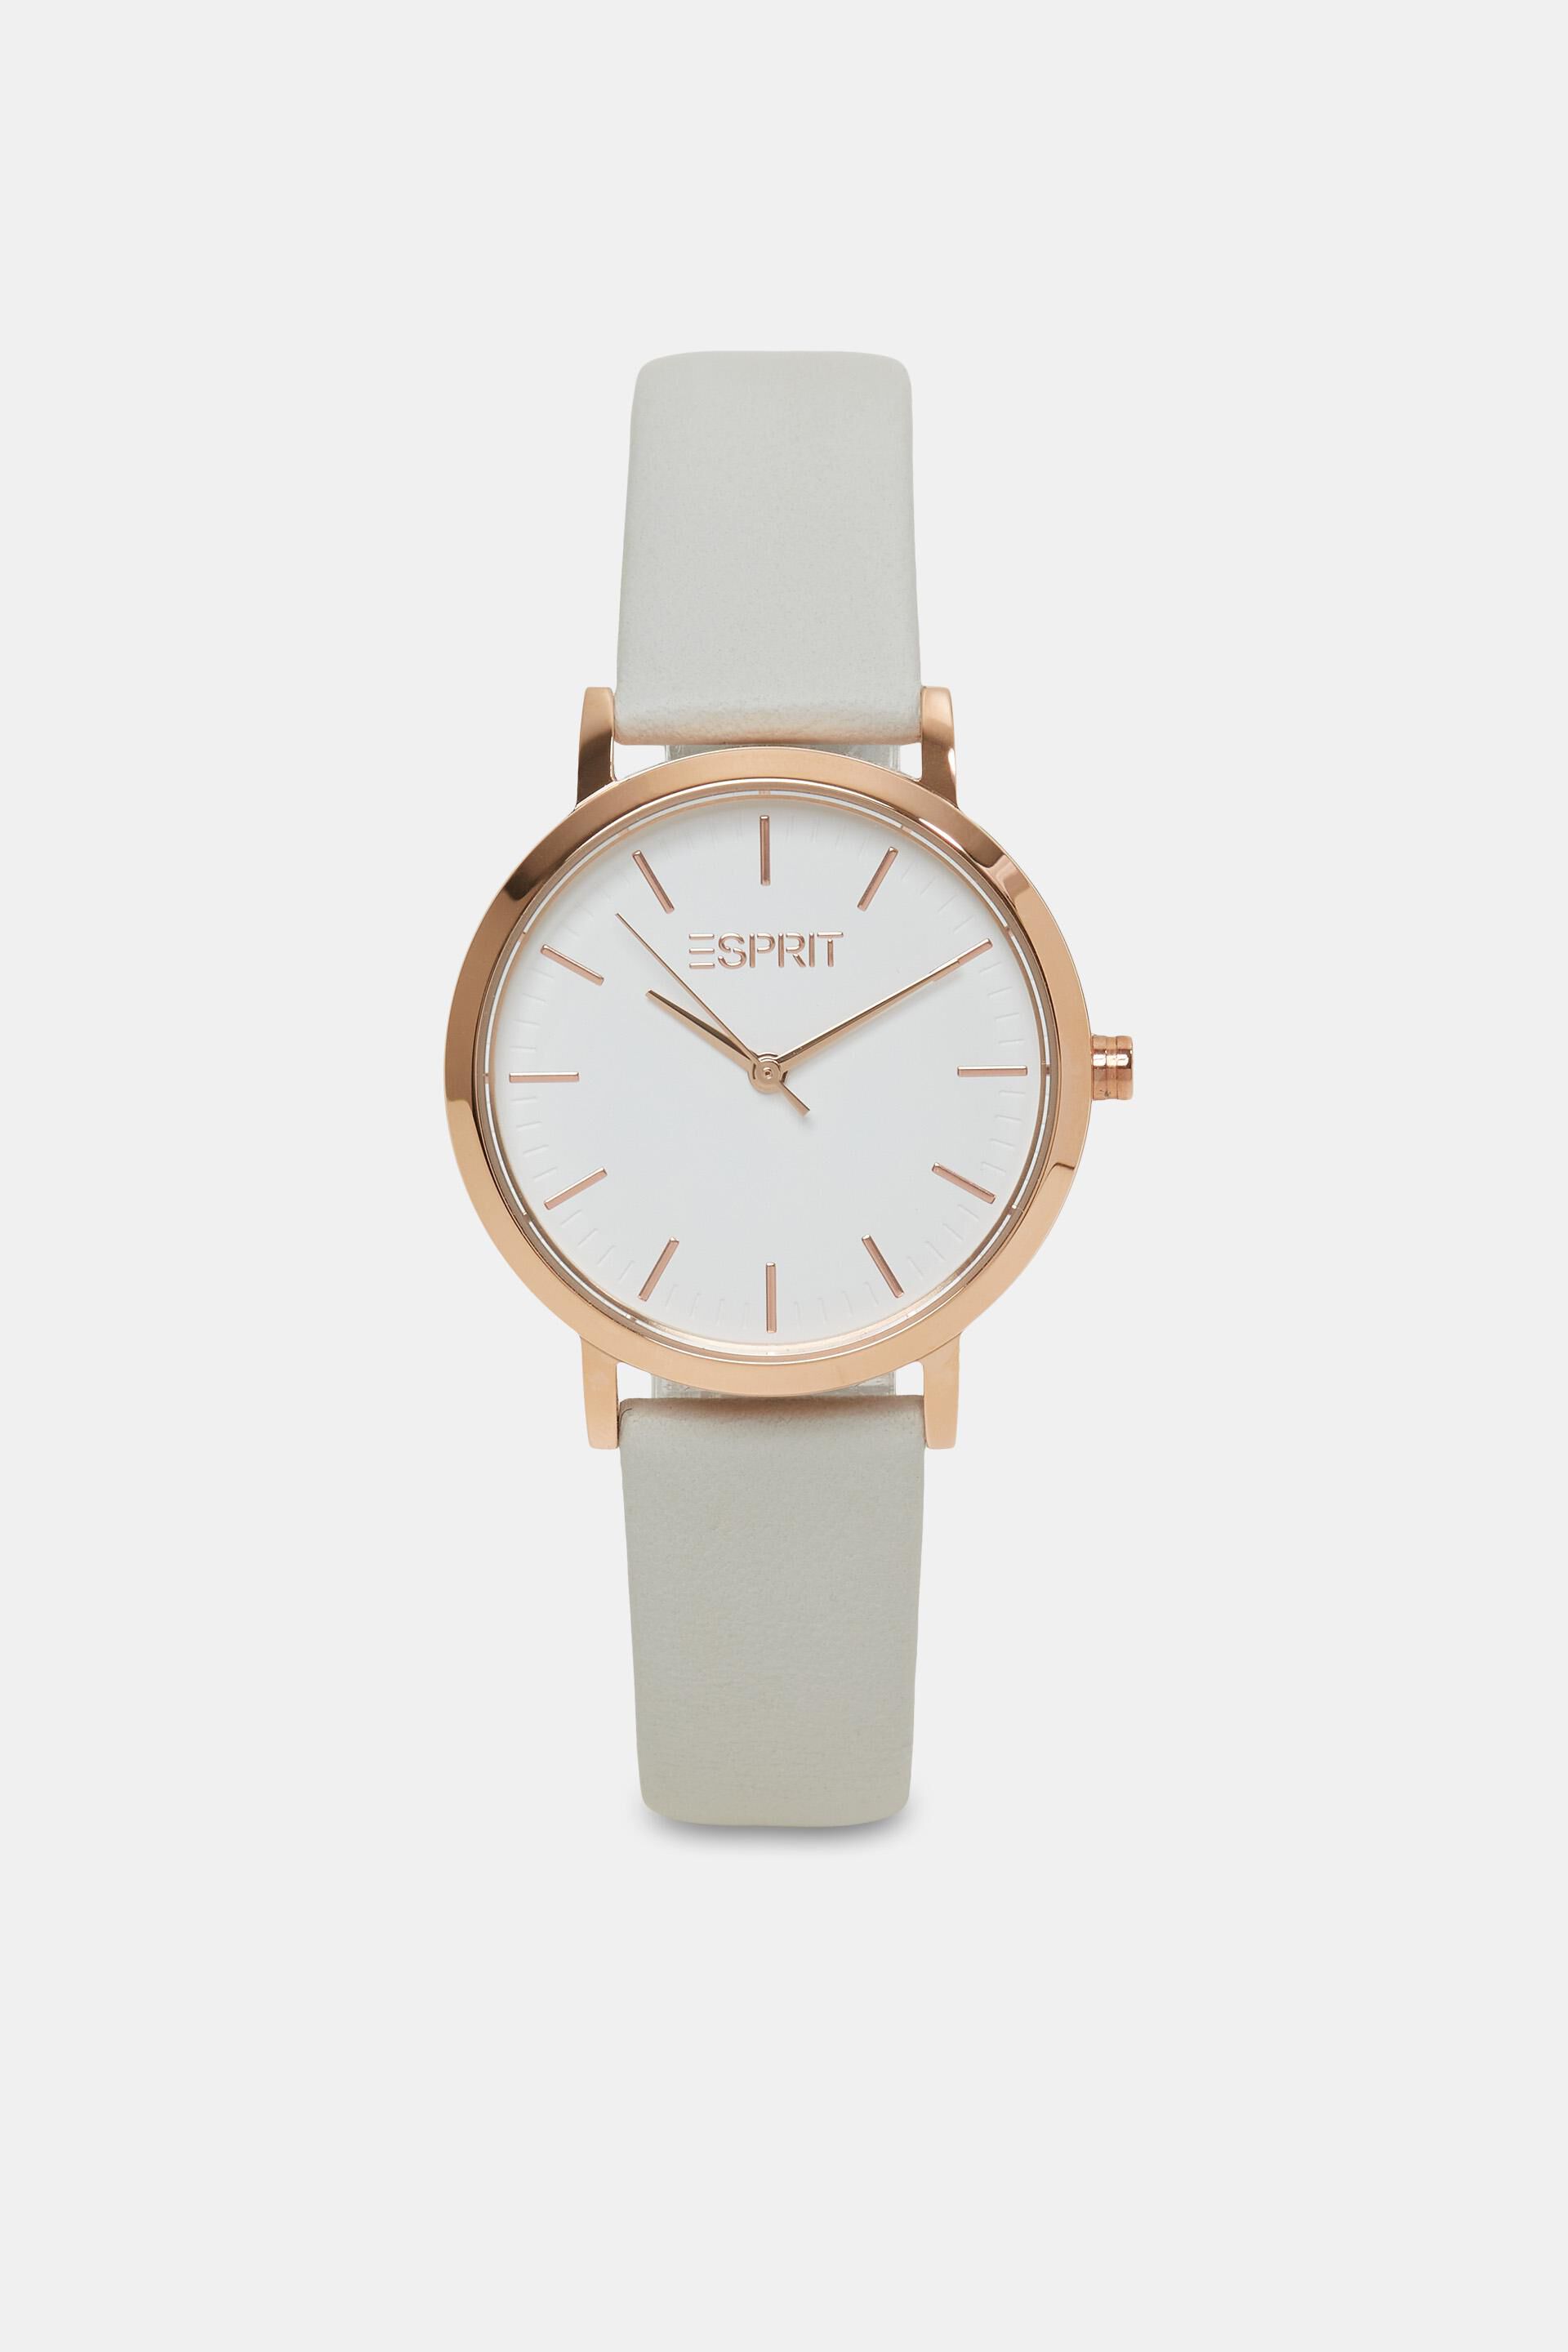 Esprit Stainless-steel with watch leather bracelet